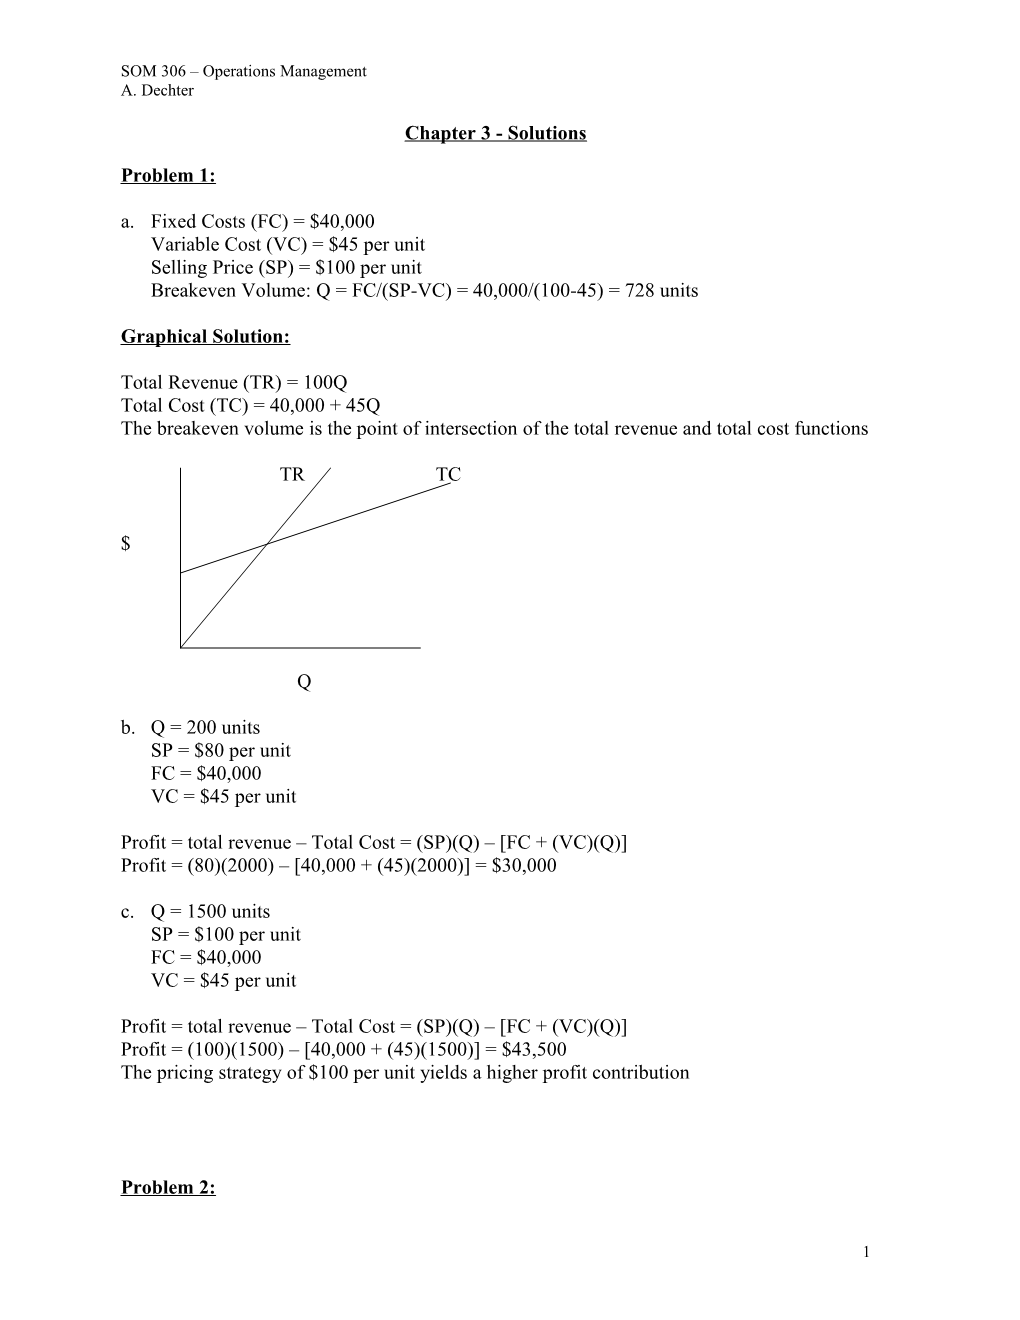 Chapter 3 - Solutions s1